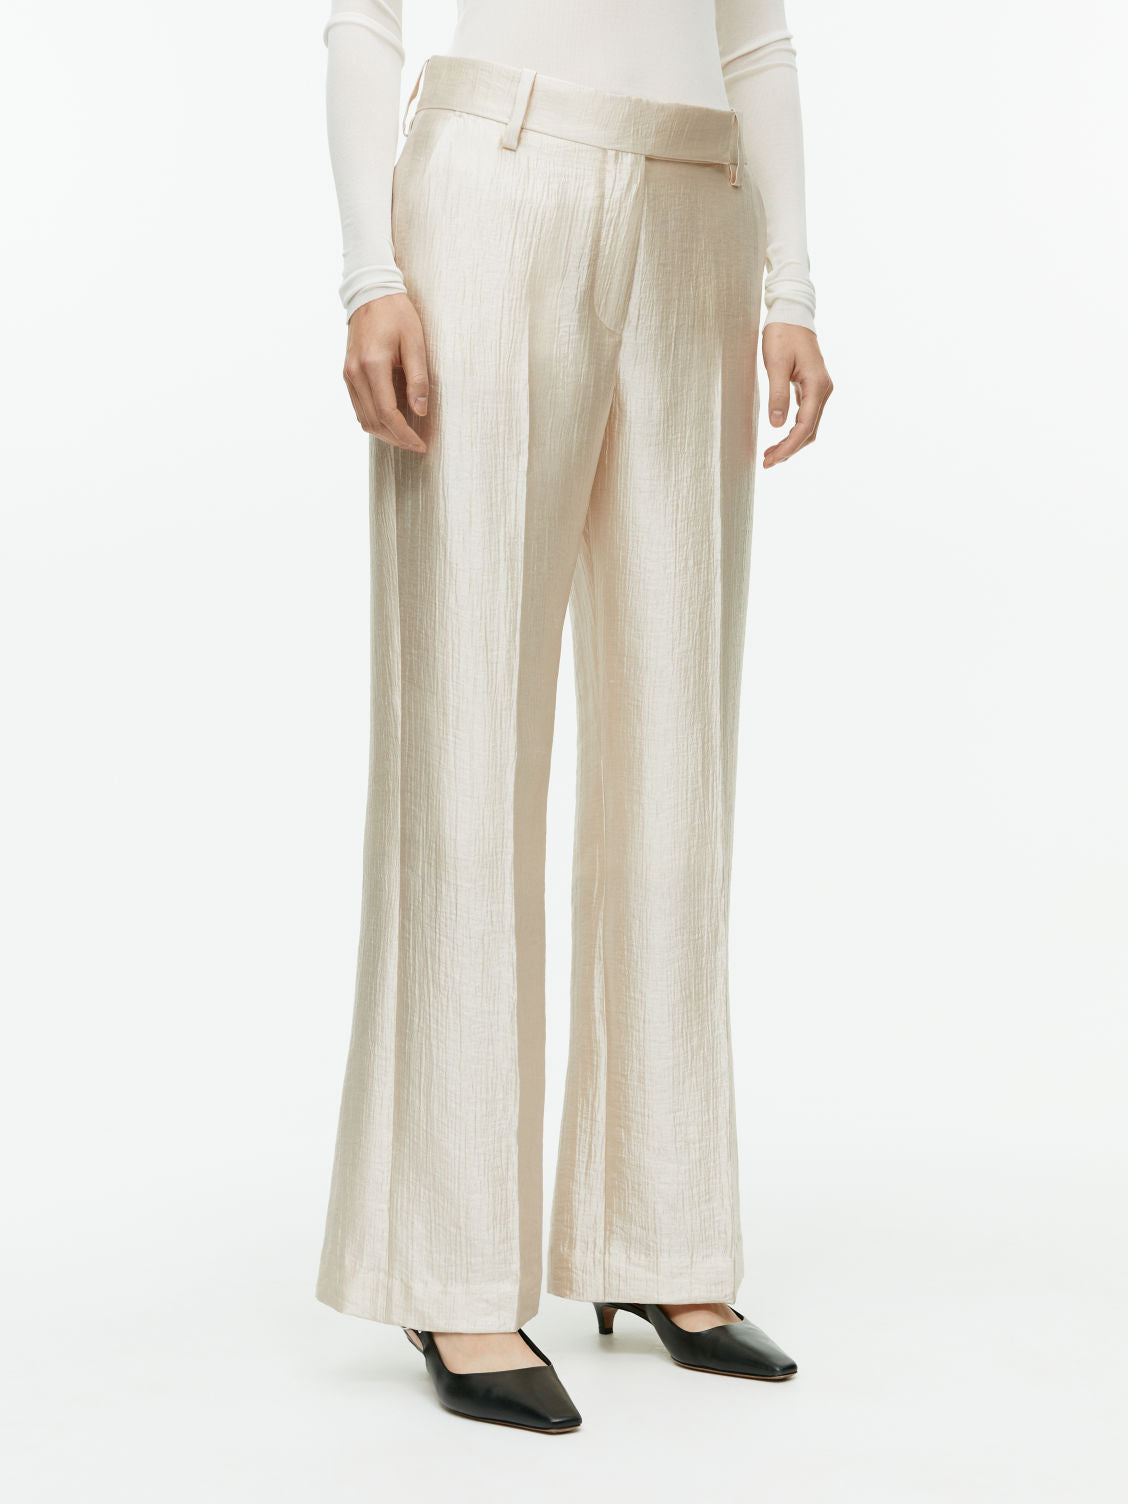 Crinkle satin trousers